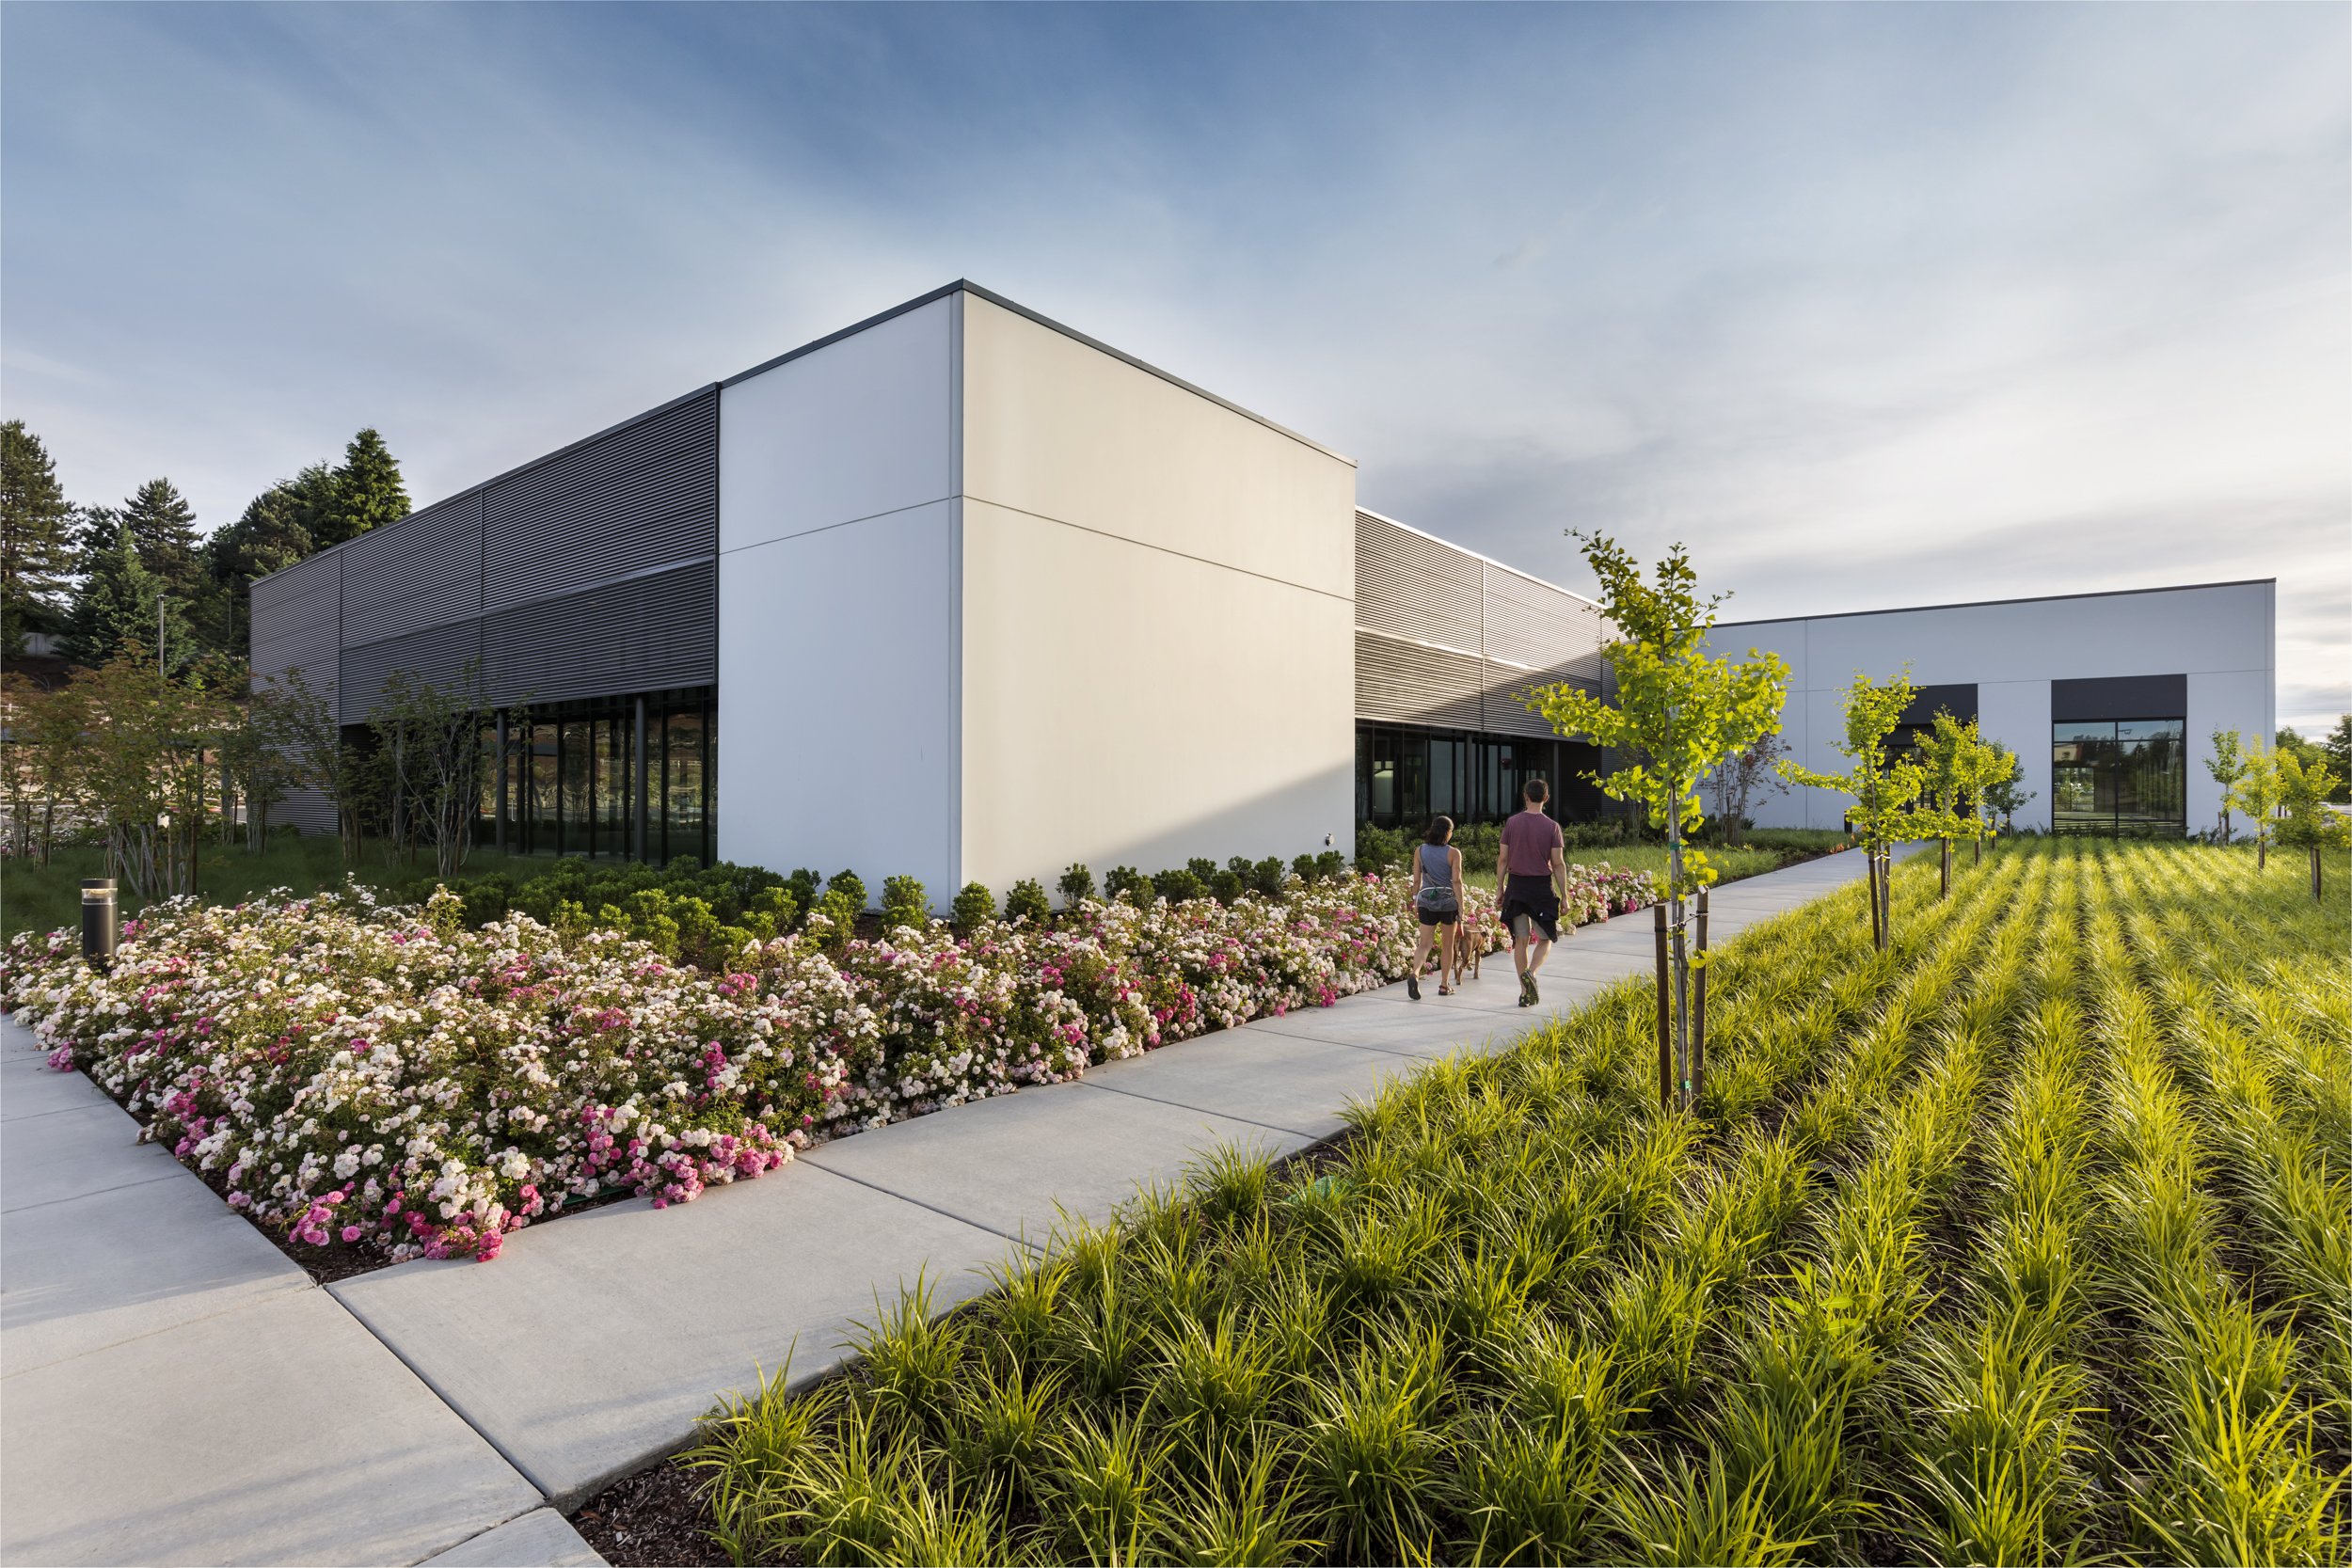 Lush green grasses and flowers line paved pathways to offices